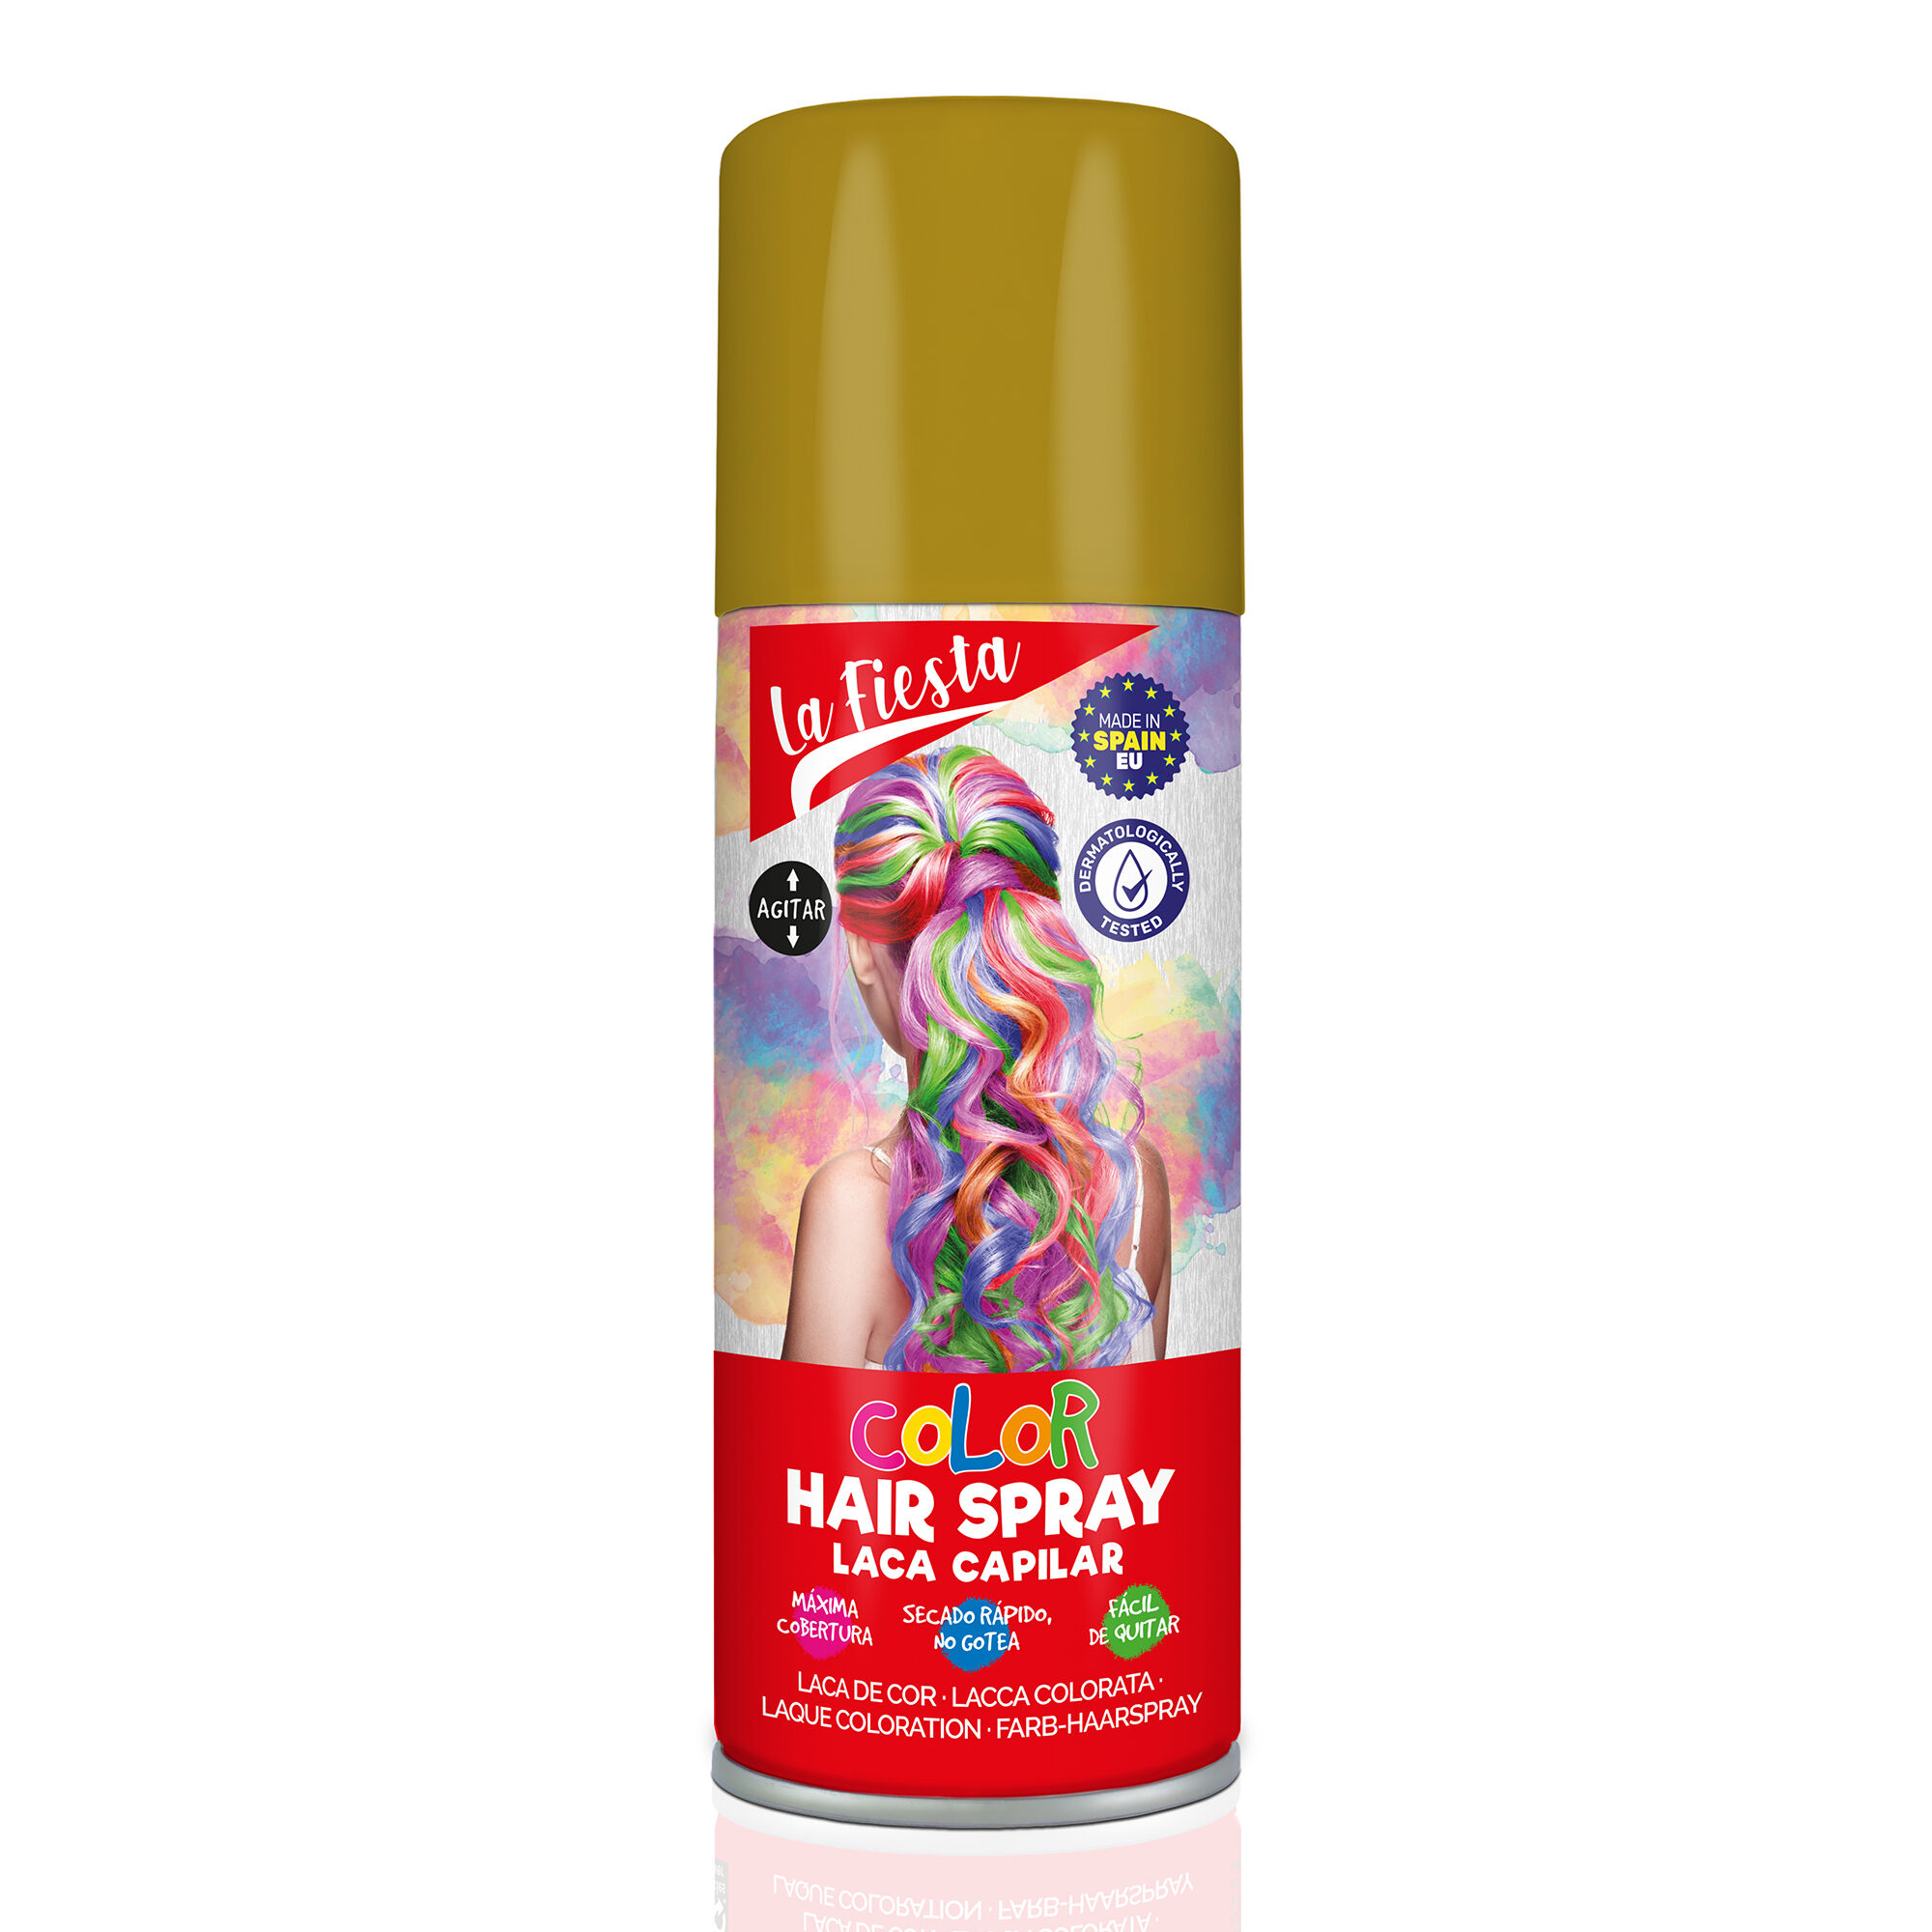 View Claires La Fiesta Color Hair Spray Shimmer Gold information